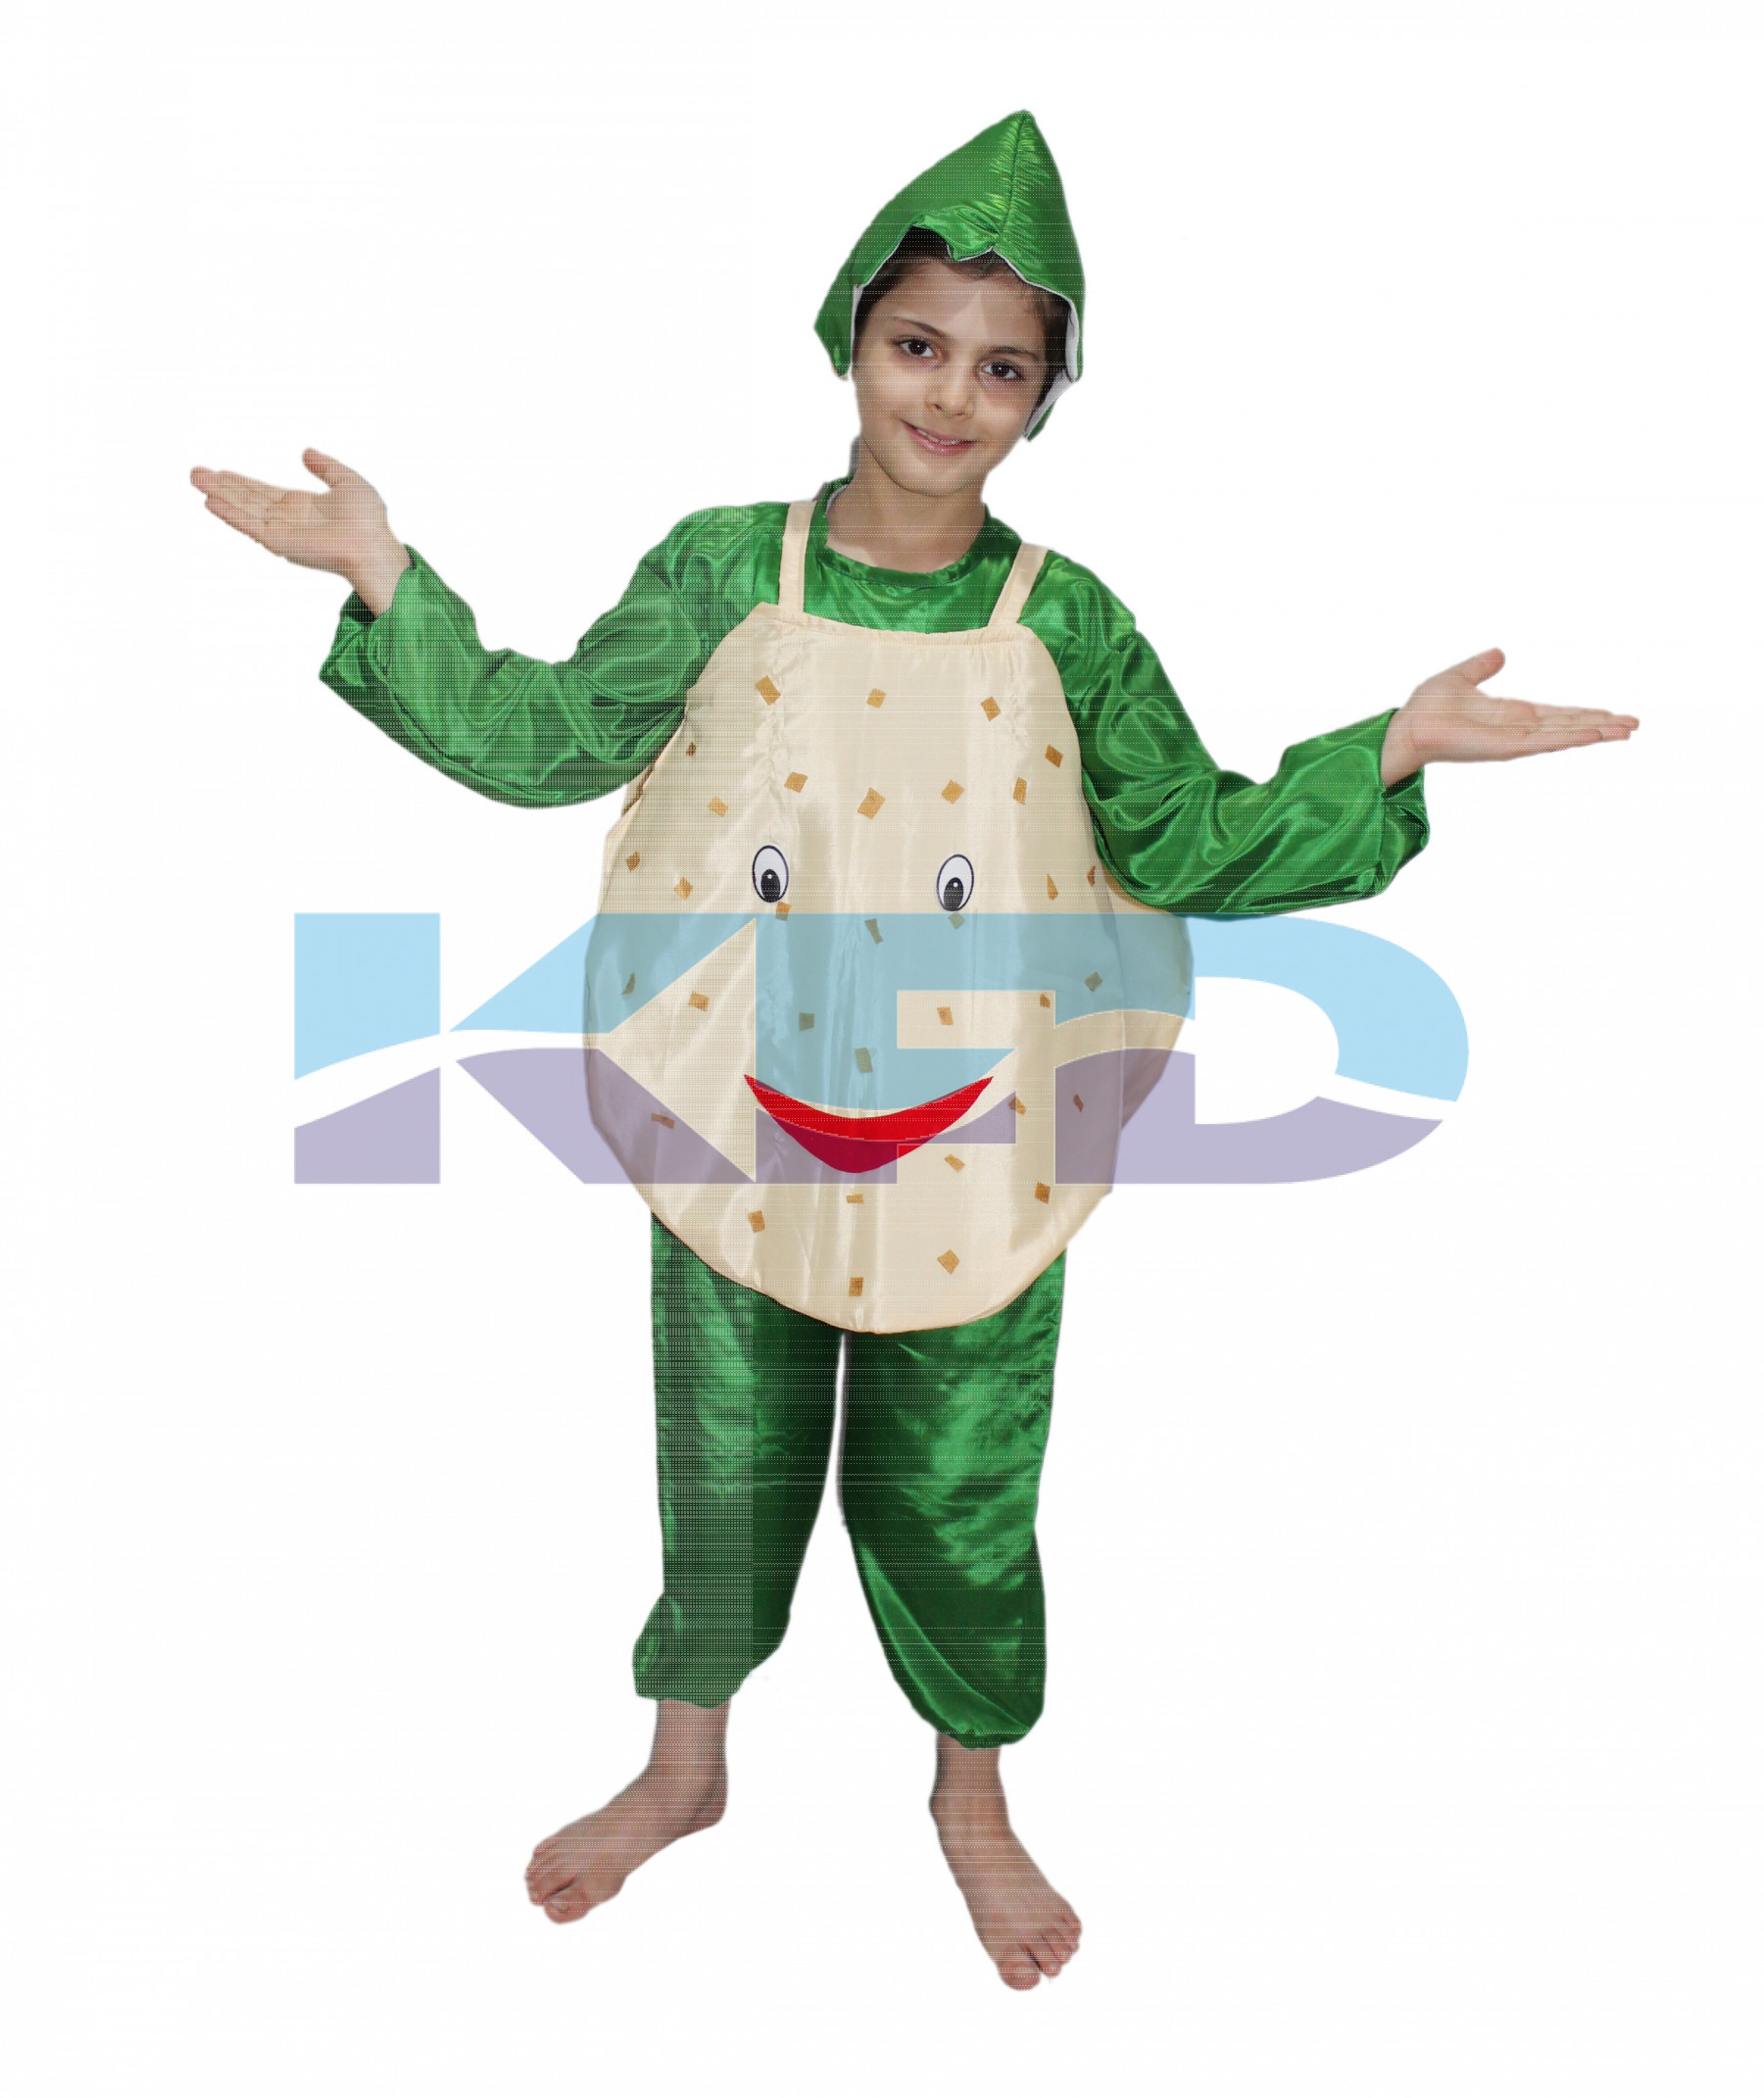 the big funny pickle mascot costume adult size free ship cartoon pickle vegetables  theme cosplay costumes carnival fancy dress - AliExpress